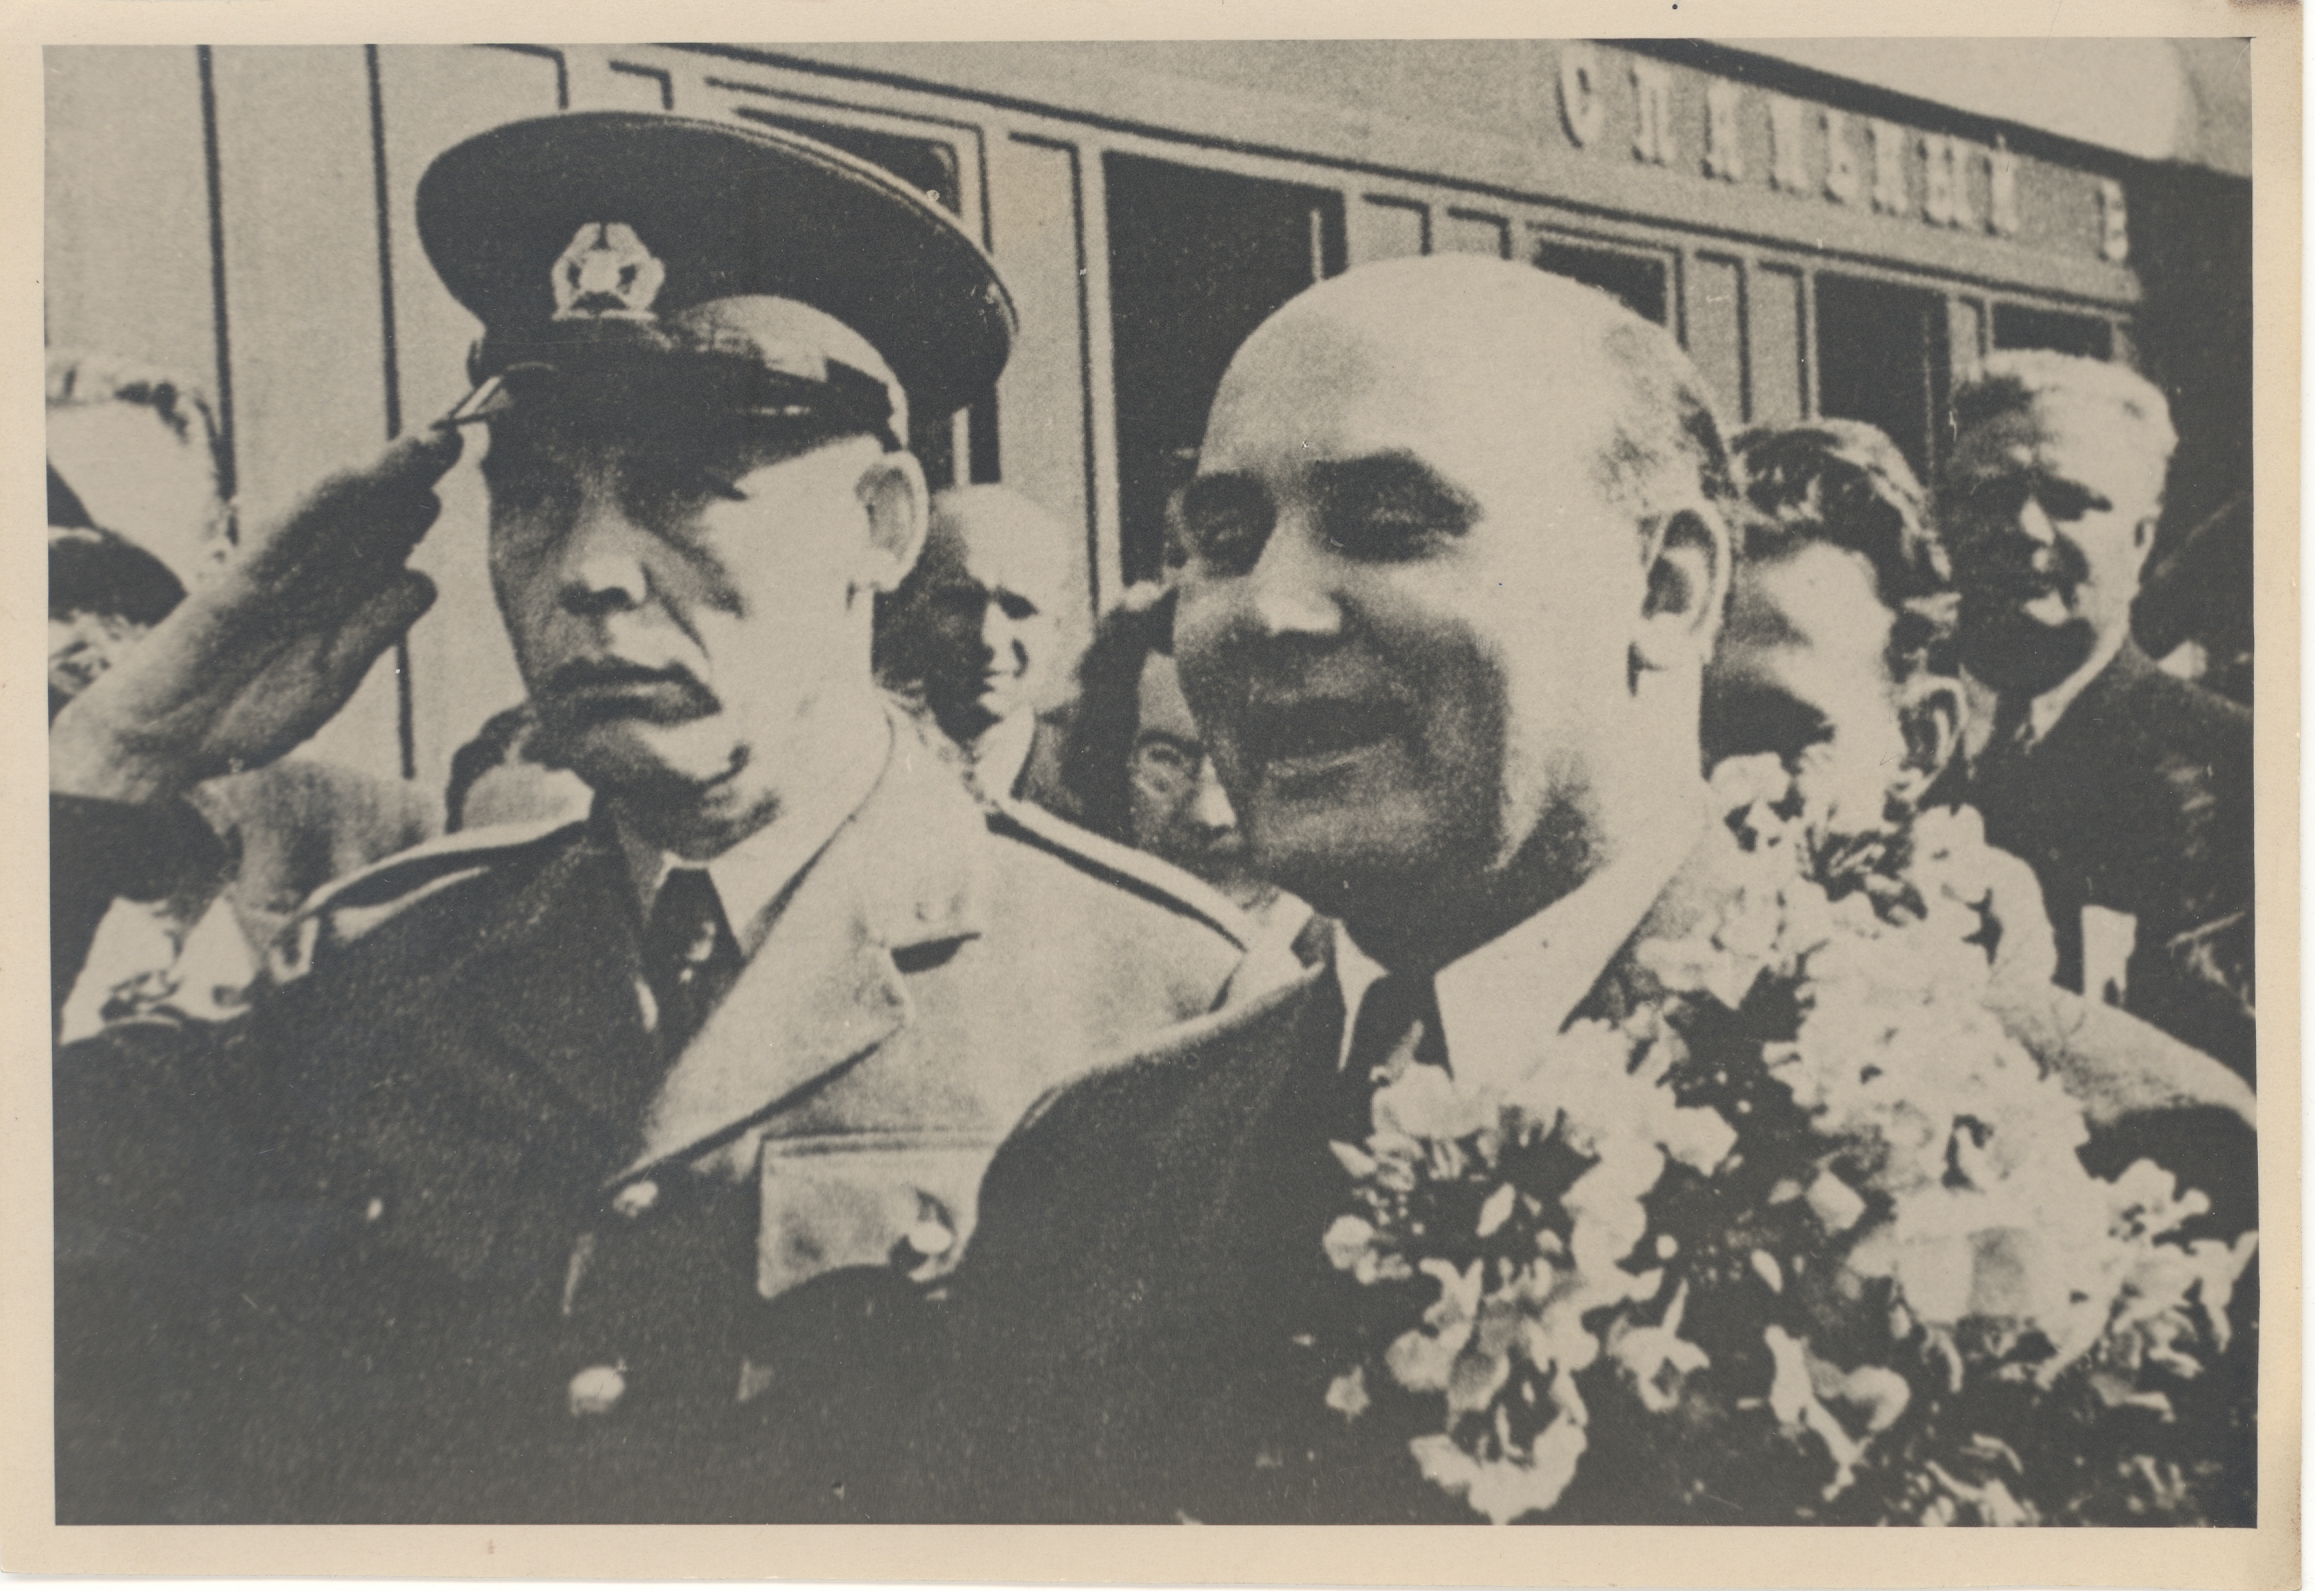 In the summer of 1940, the delegation traveled to Moscow. At the forefront of Paul Kreedo and J. Vares-Barbarus